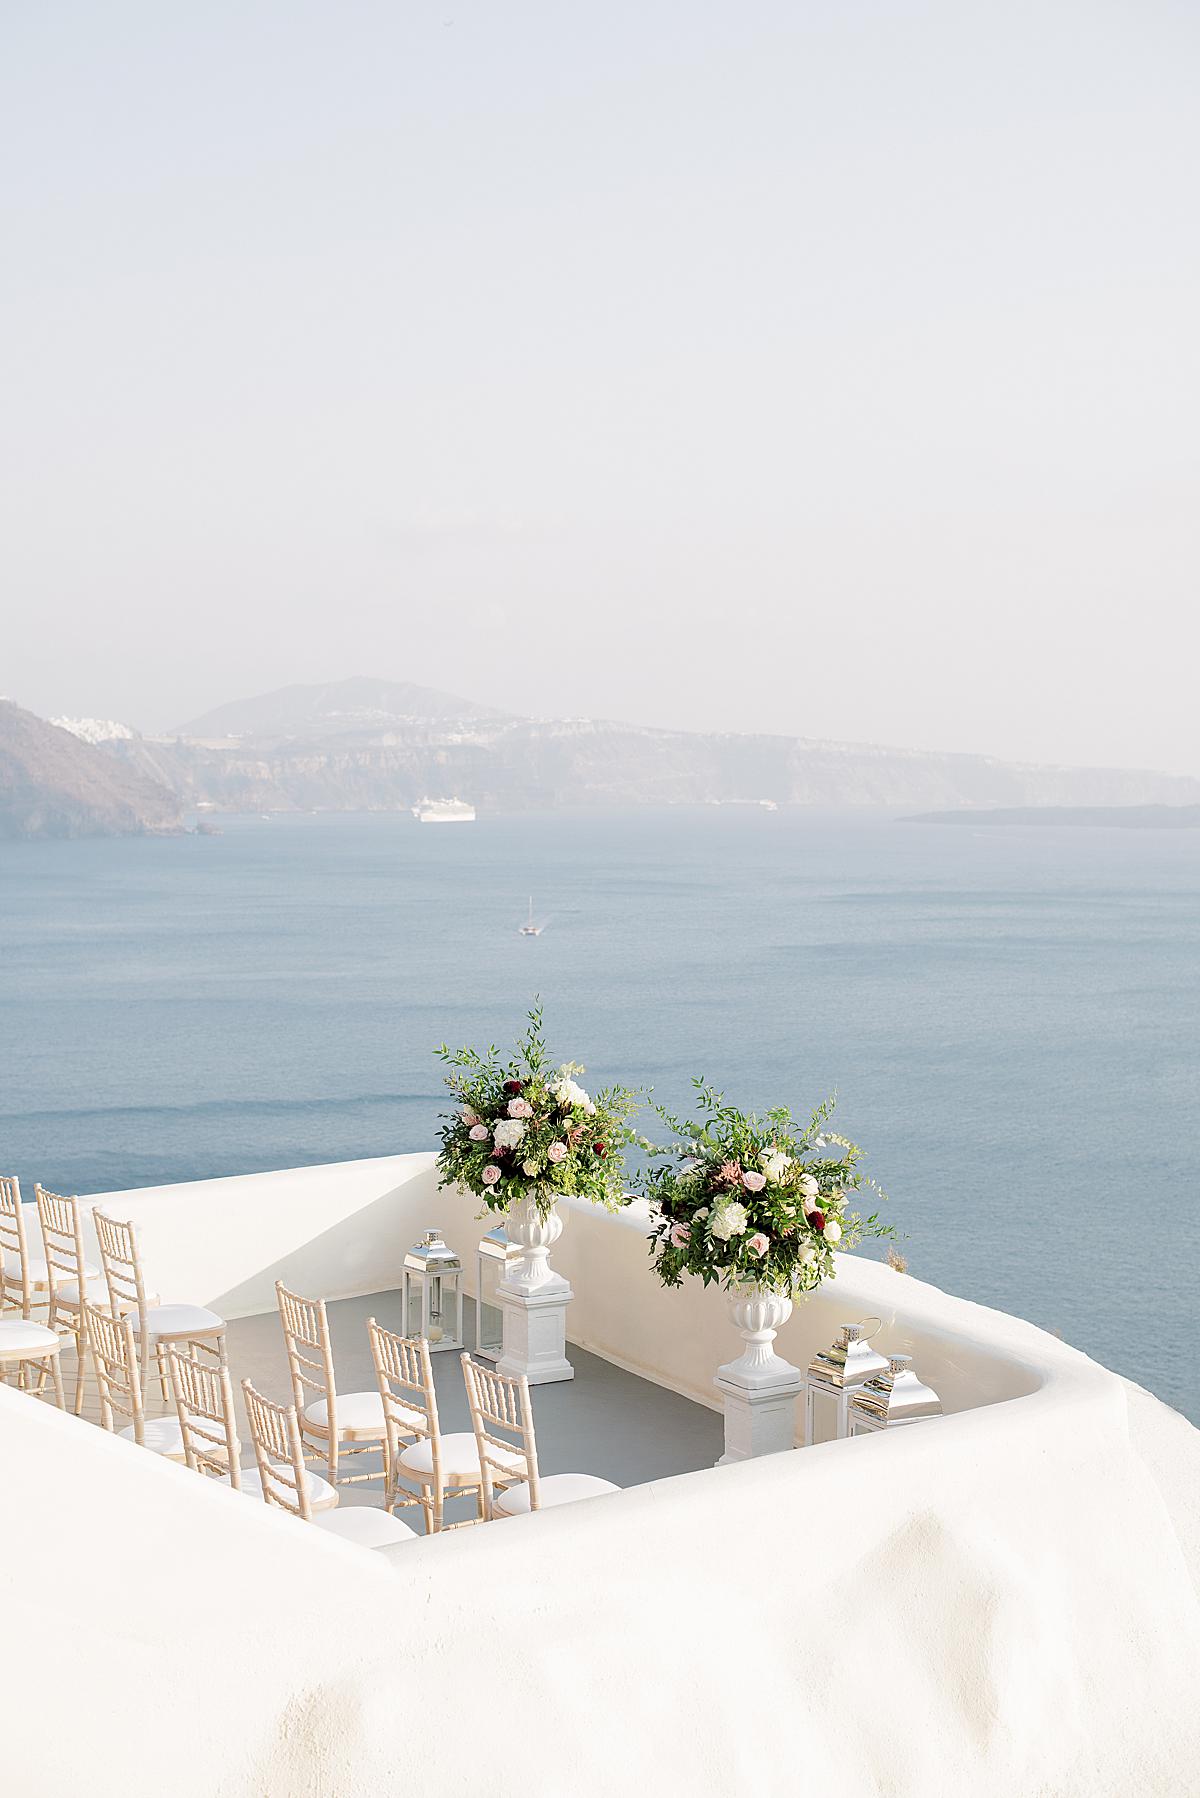 wedding ceremony set up at canaves oia santorini